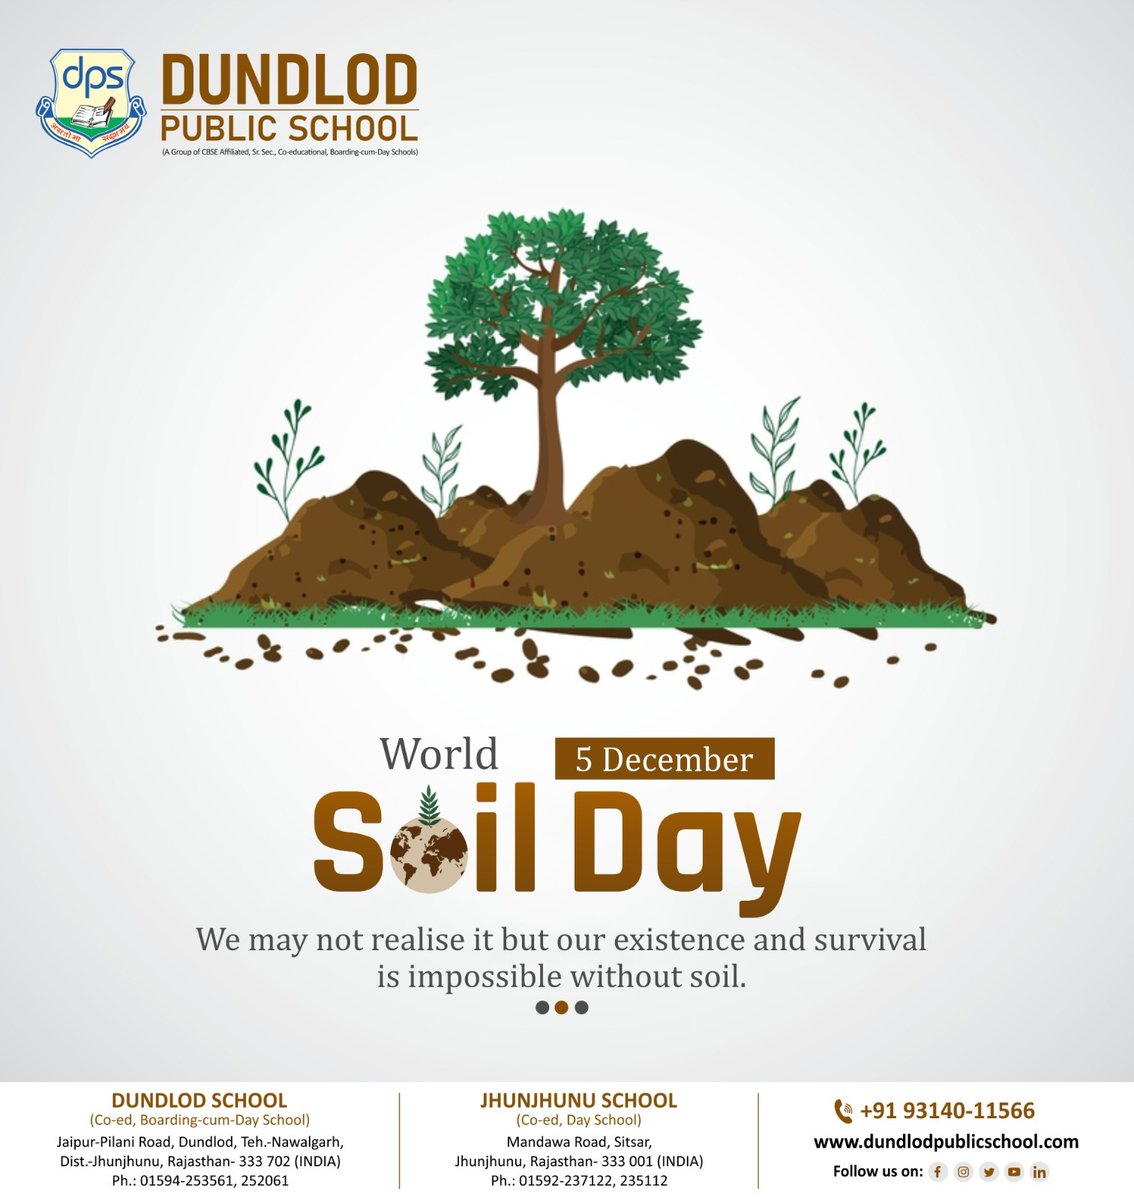 🌱 WORLD SOIL DAY 🌱

🌱🌍 Sometimes overlooked, yet utterly indispensable. Our very existence and survival hinge on the silent support of soil. 🌾🌿

#SoilSustainability #EssenceOfLife #CherishOurSoil #DundlodPublicSchool #DPS #DUNDLOD #Dundlod #DundlodGroupofSchool #SoilScience